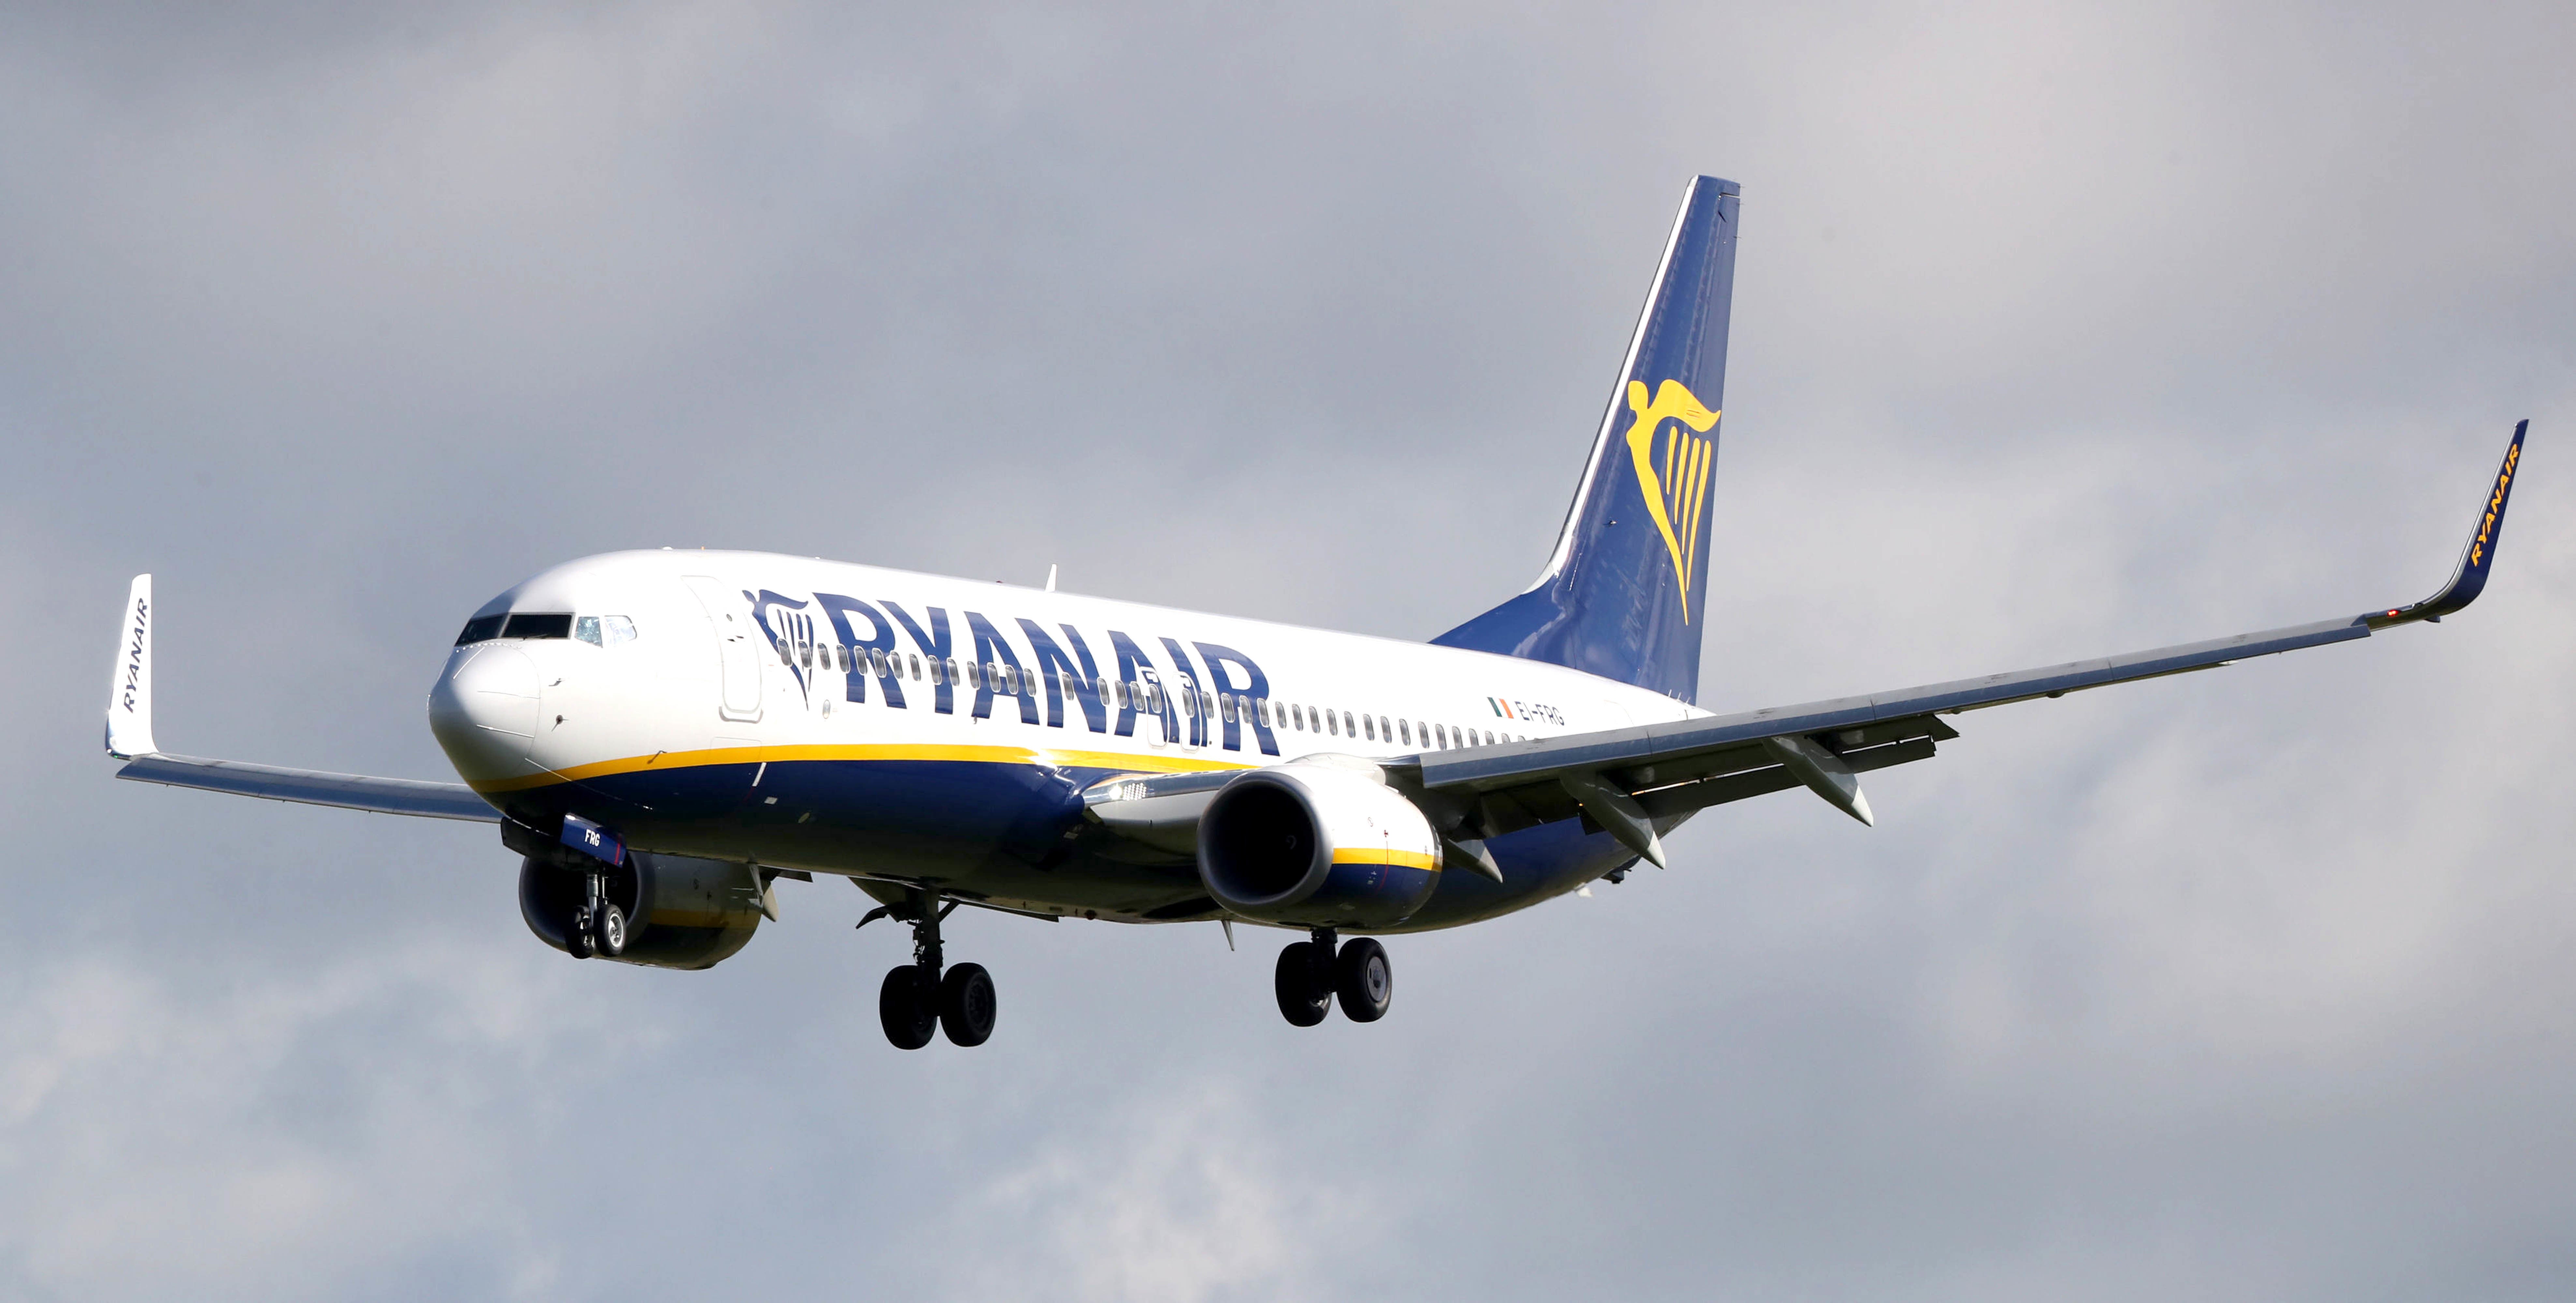 Ryanair has said it expects to fly up to 100 million passengers this year (Niall Carson/PA)